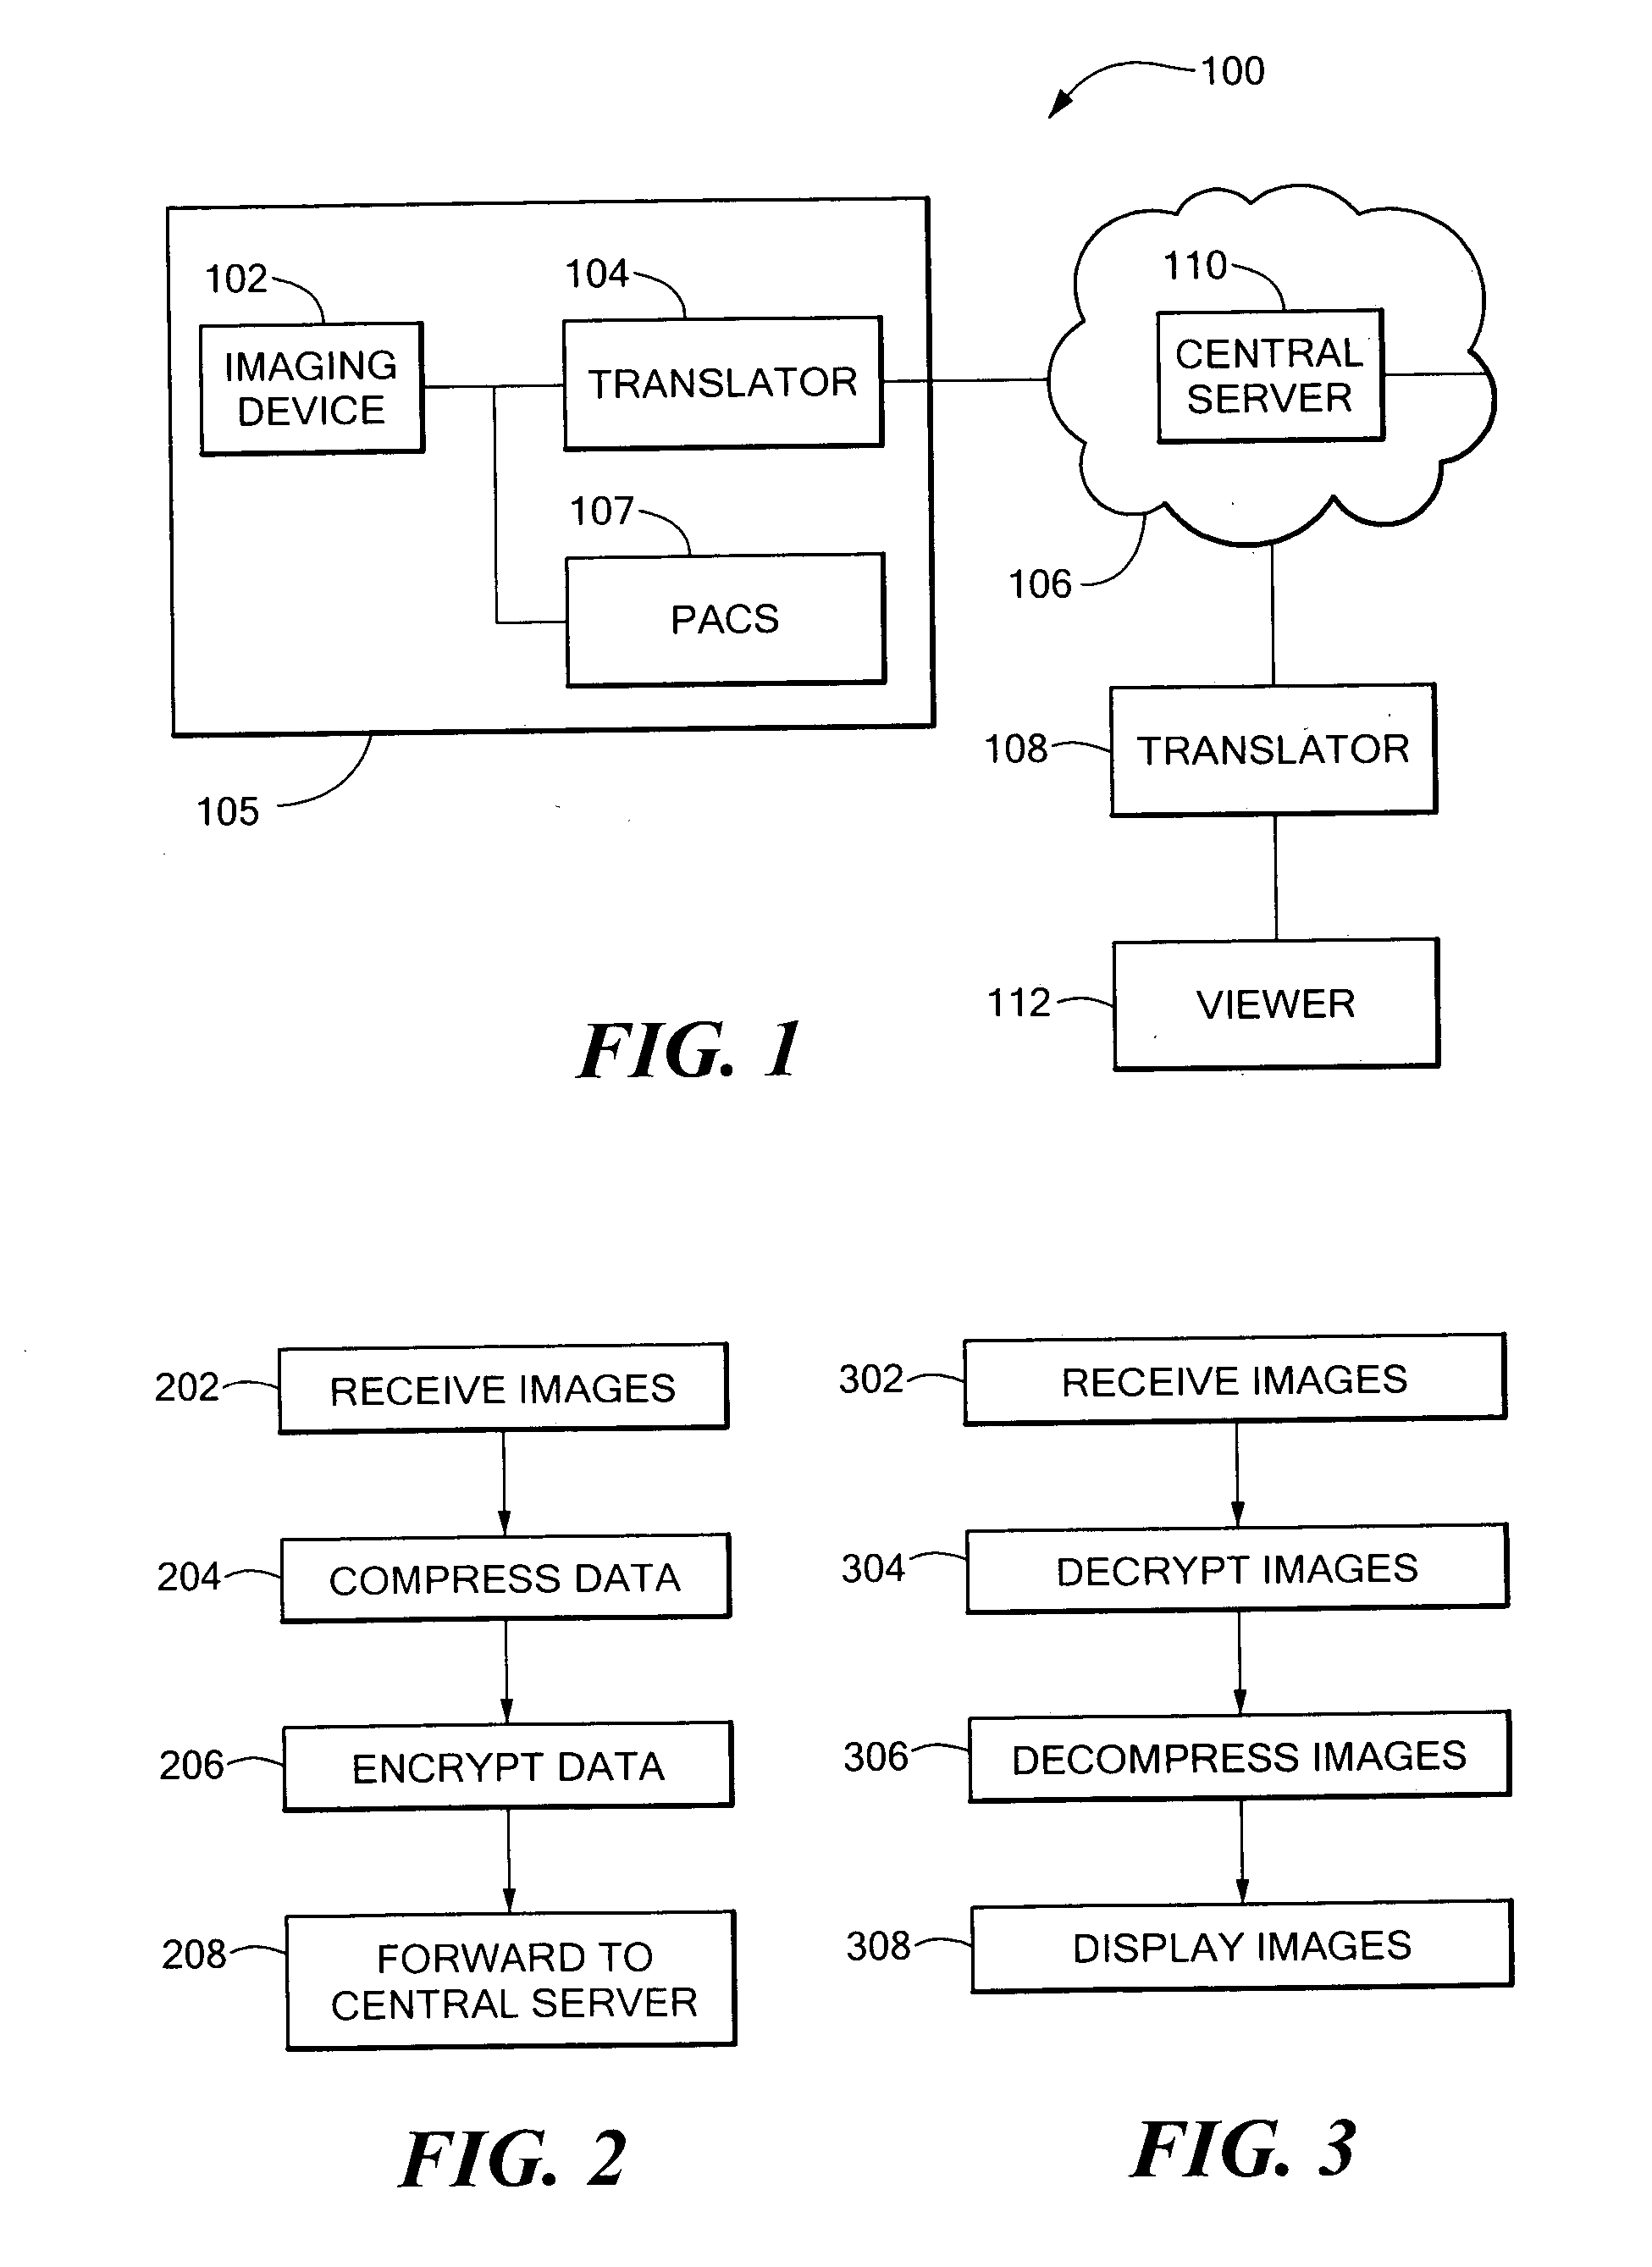 Systems and methods for providing diagnostic imaging studies to remote users